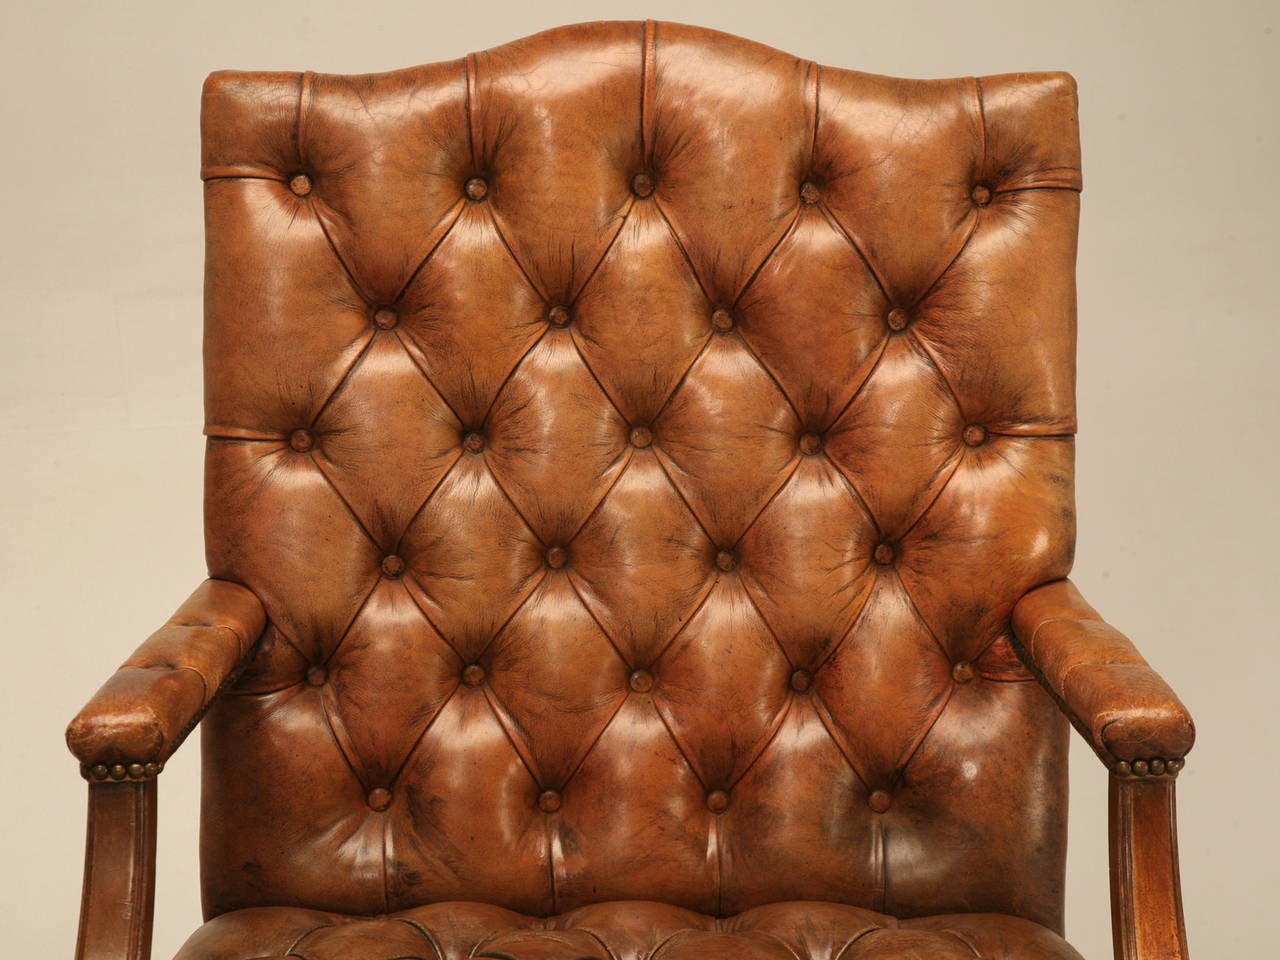 Pair of vintage English armchairs done in a button tufted, or more commonly referred to as a Chesterfield style. The chairs sit quite nice, and the leather appears to be about 60-70 years old; please note the repair to the backside of one of the